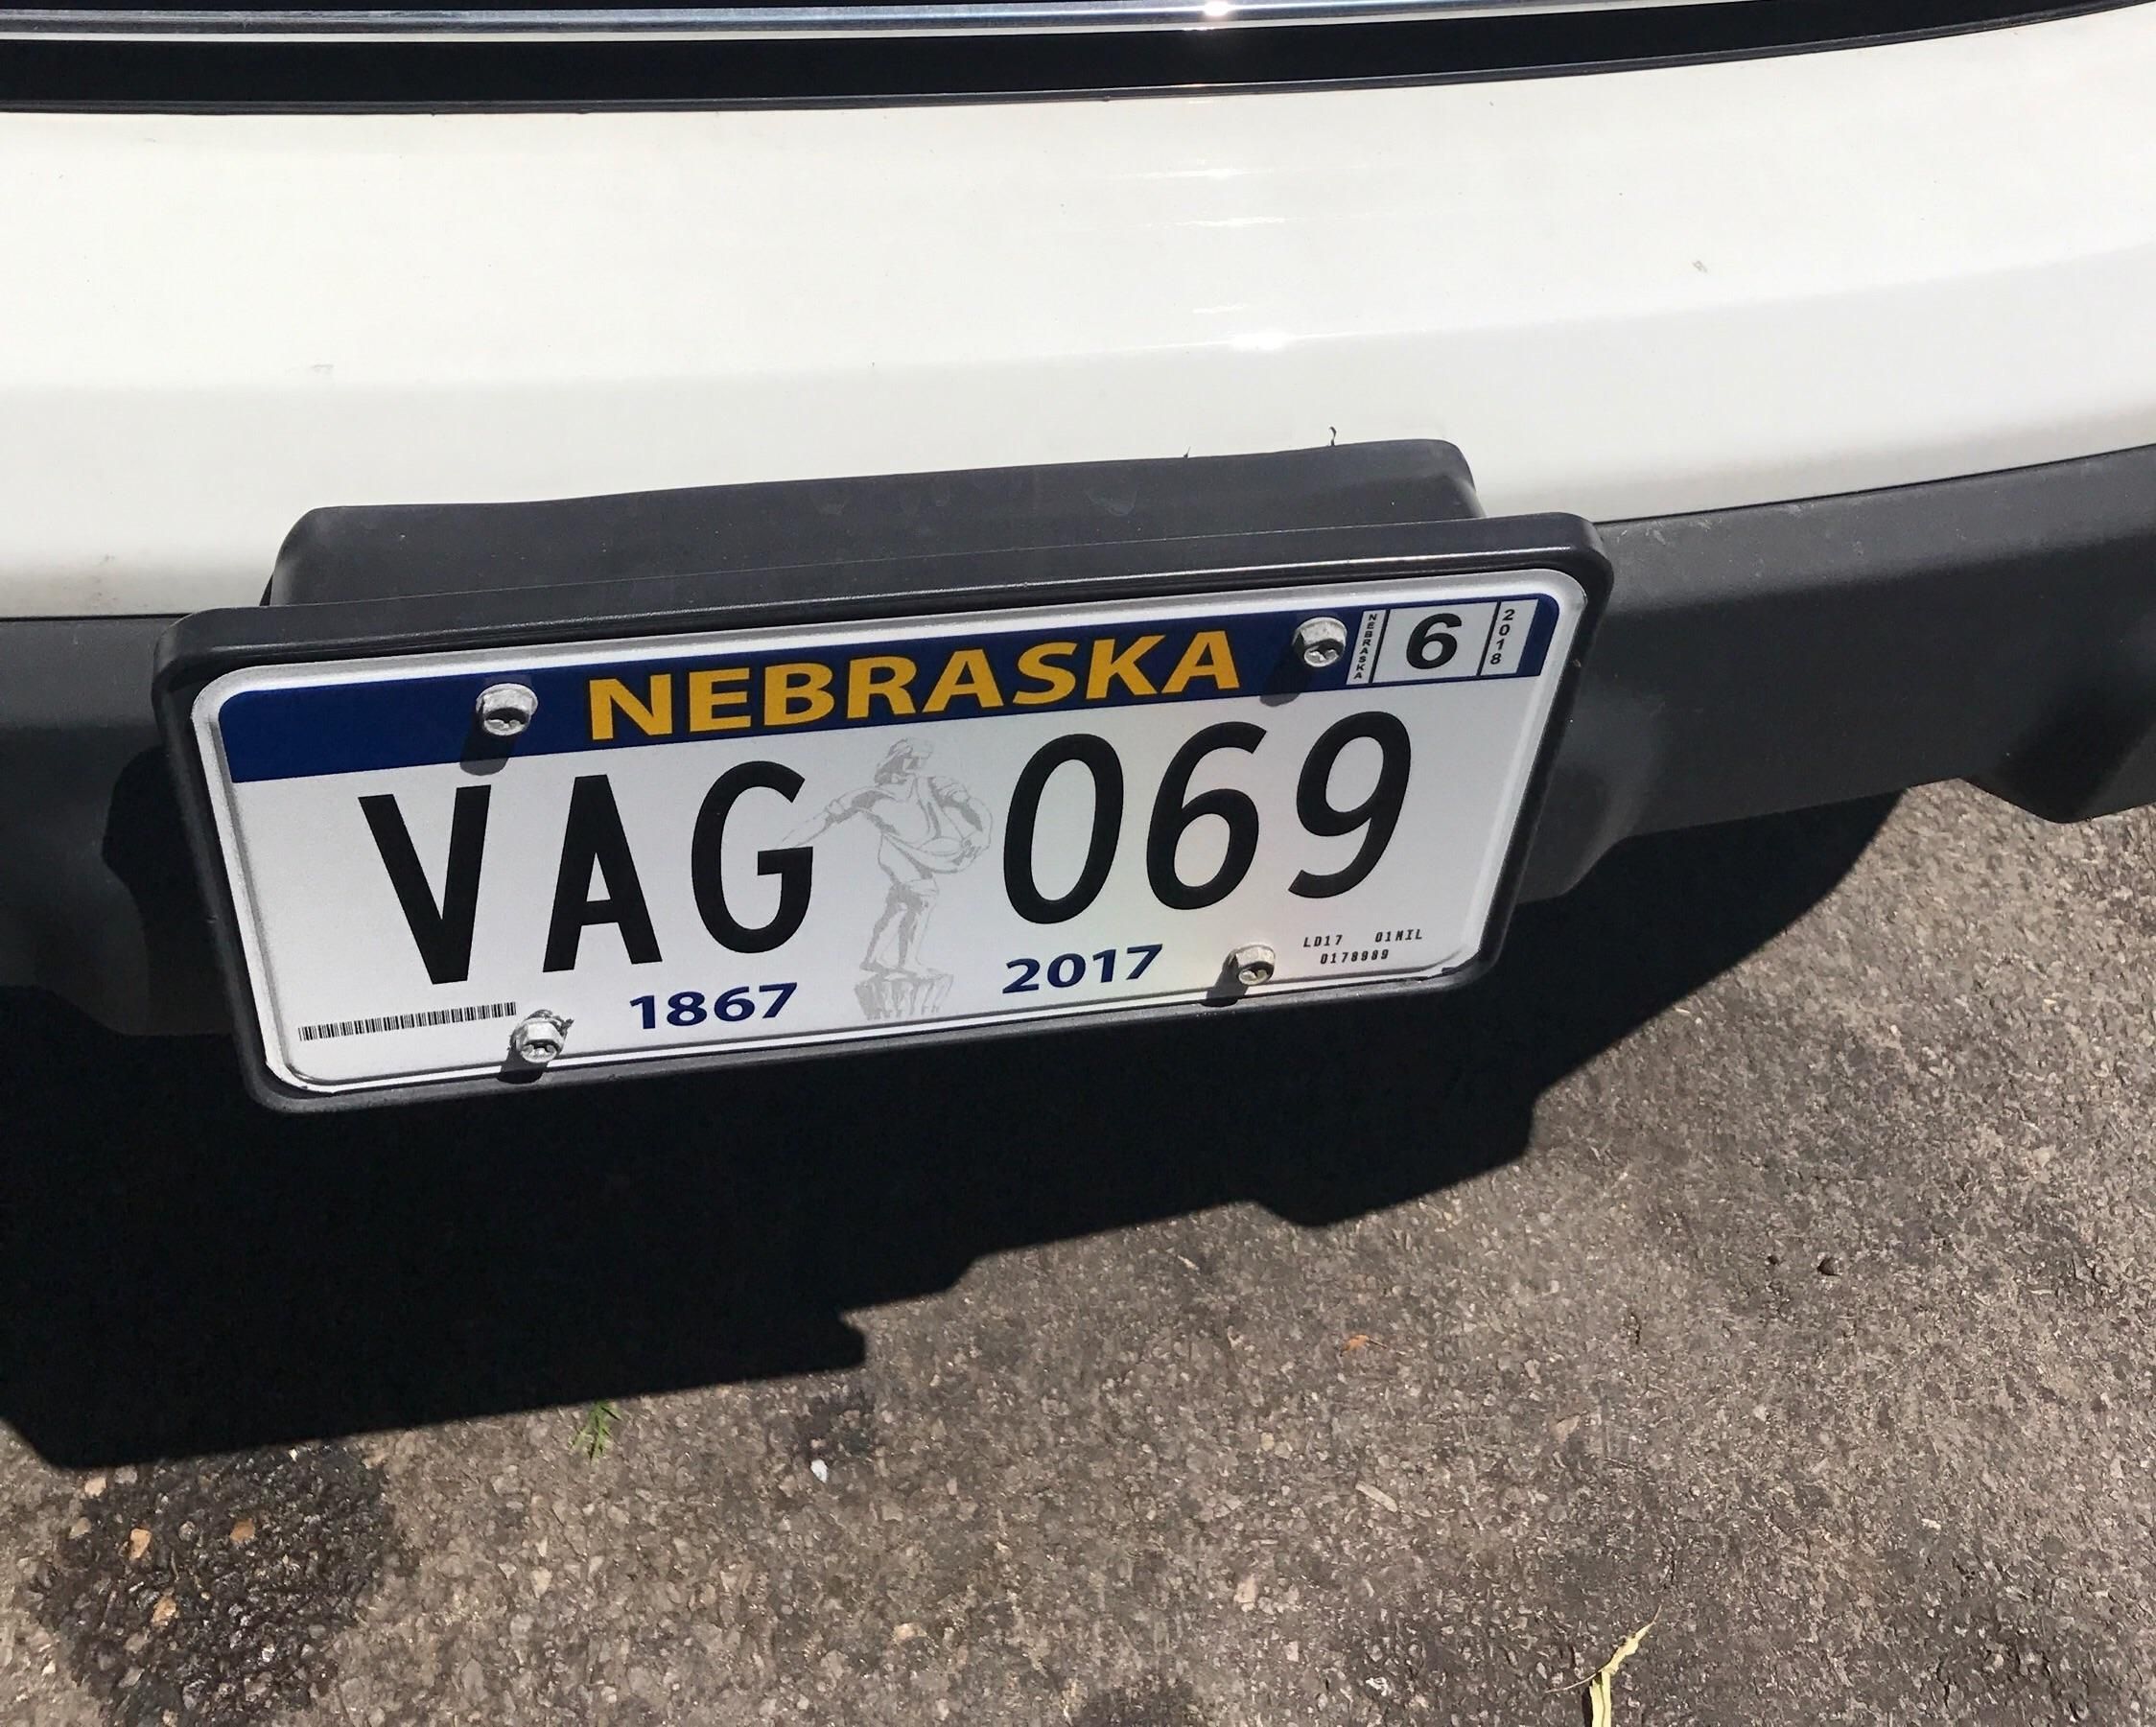 My friend's sister-in-law received her new license plates this week. Here is what the DMV sent her...